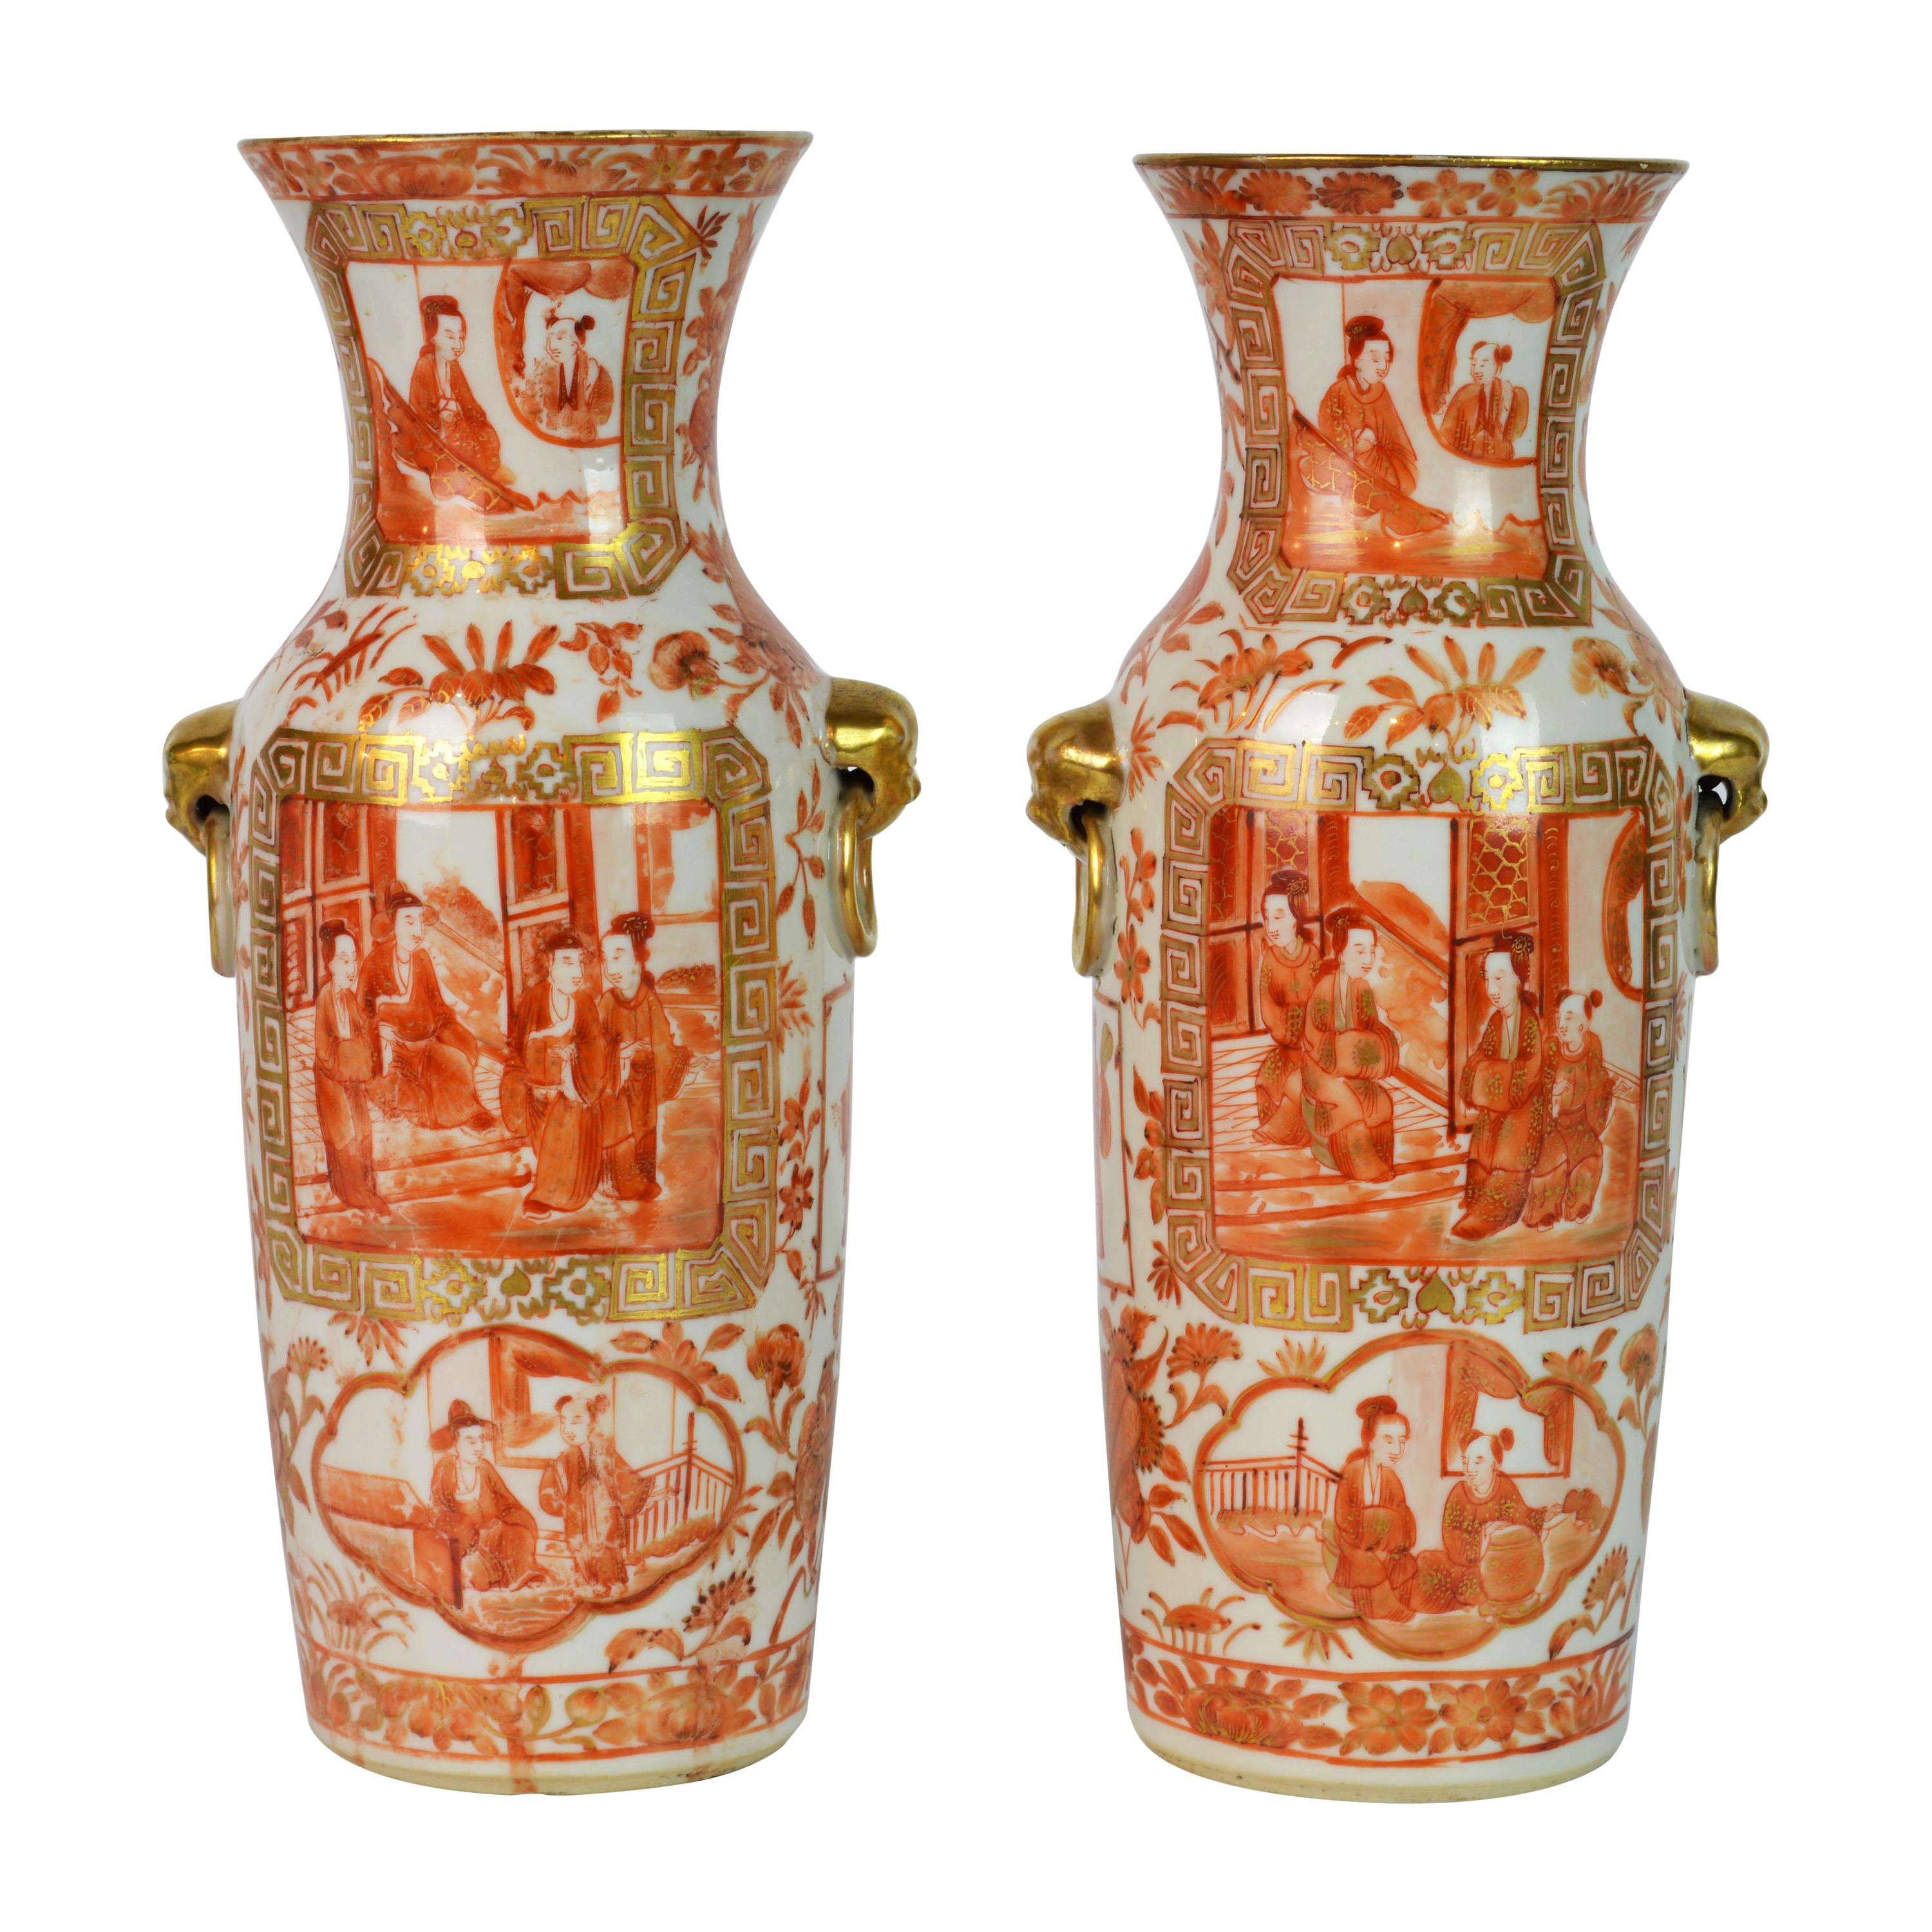 Rare 19th Century Orange and Gilt Decorated Chinese Export Daoguang Vases, Pair